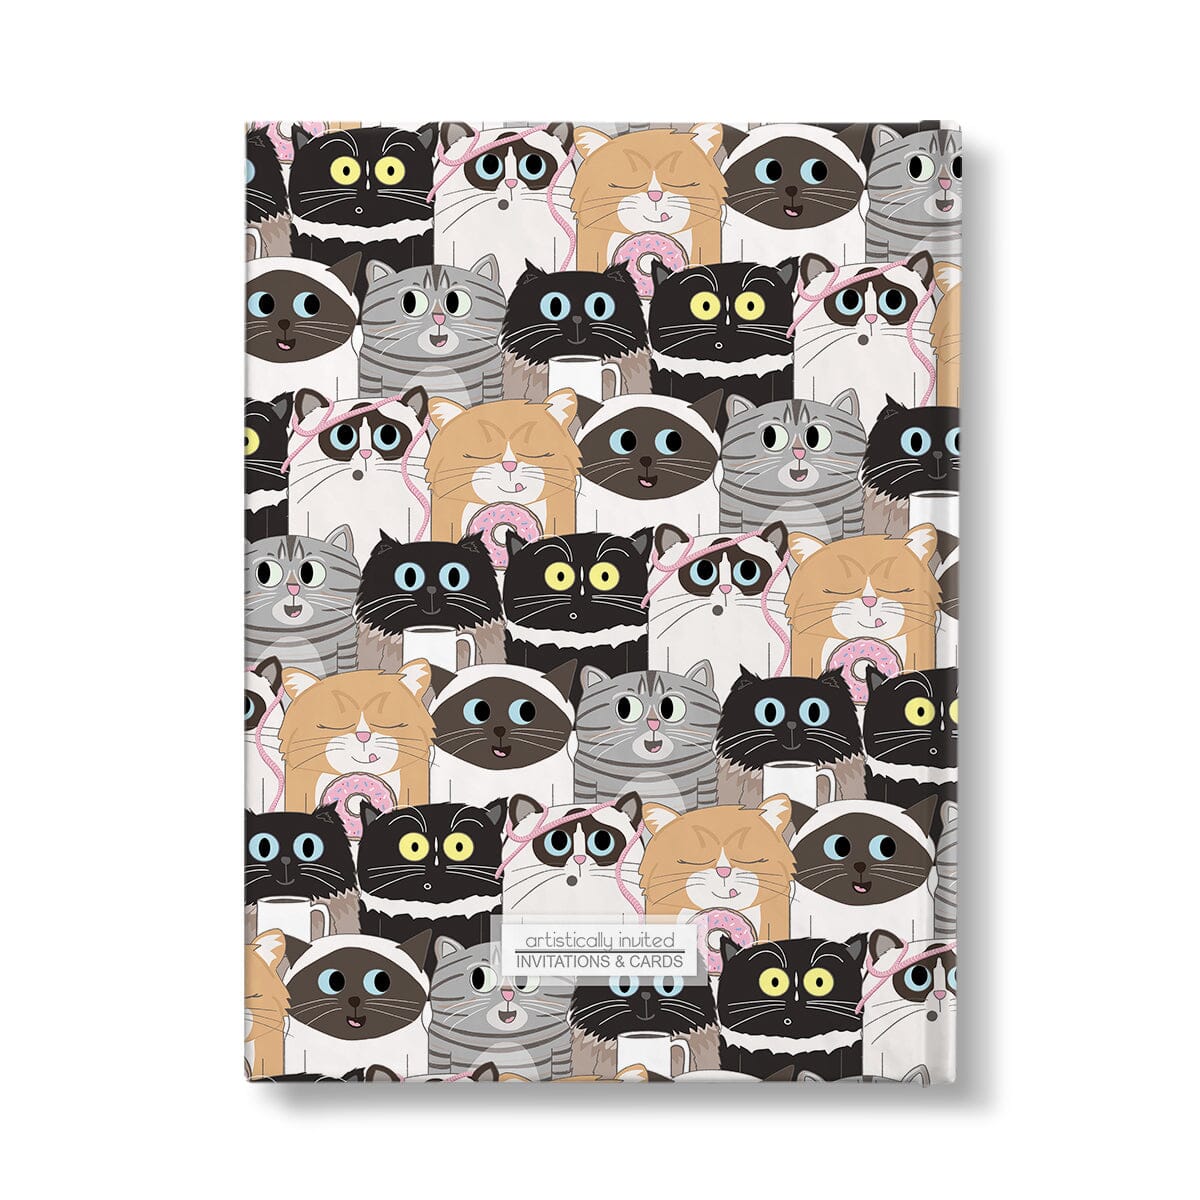 Personalized Cute Cat Stack Pattern Journal at Artistically Invited. Back side of journal.